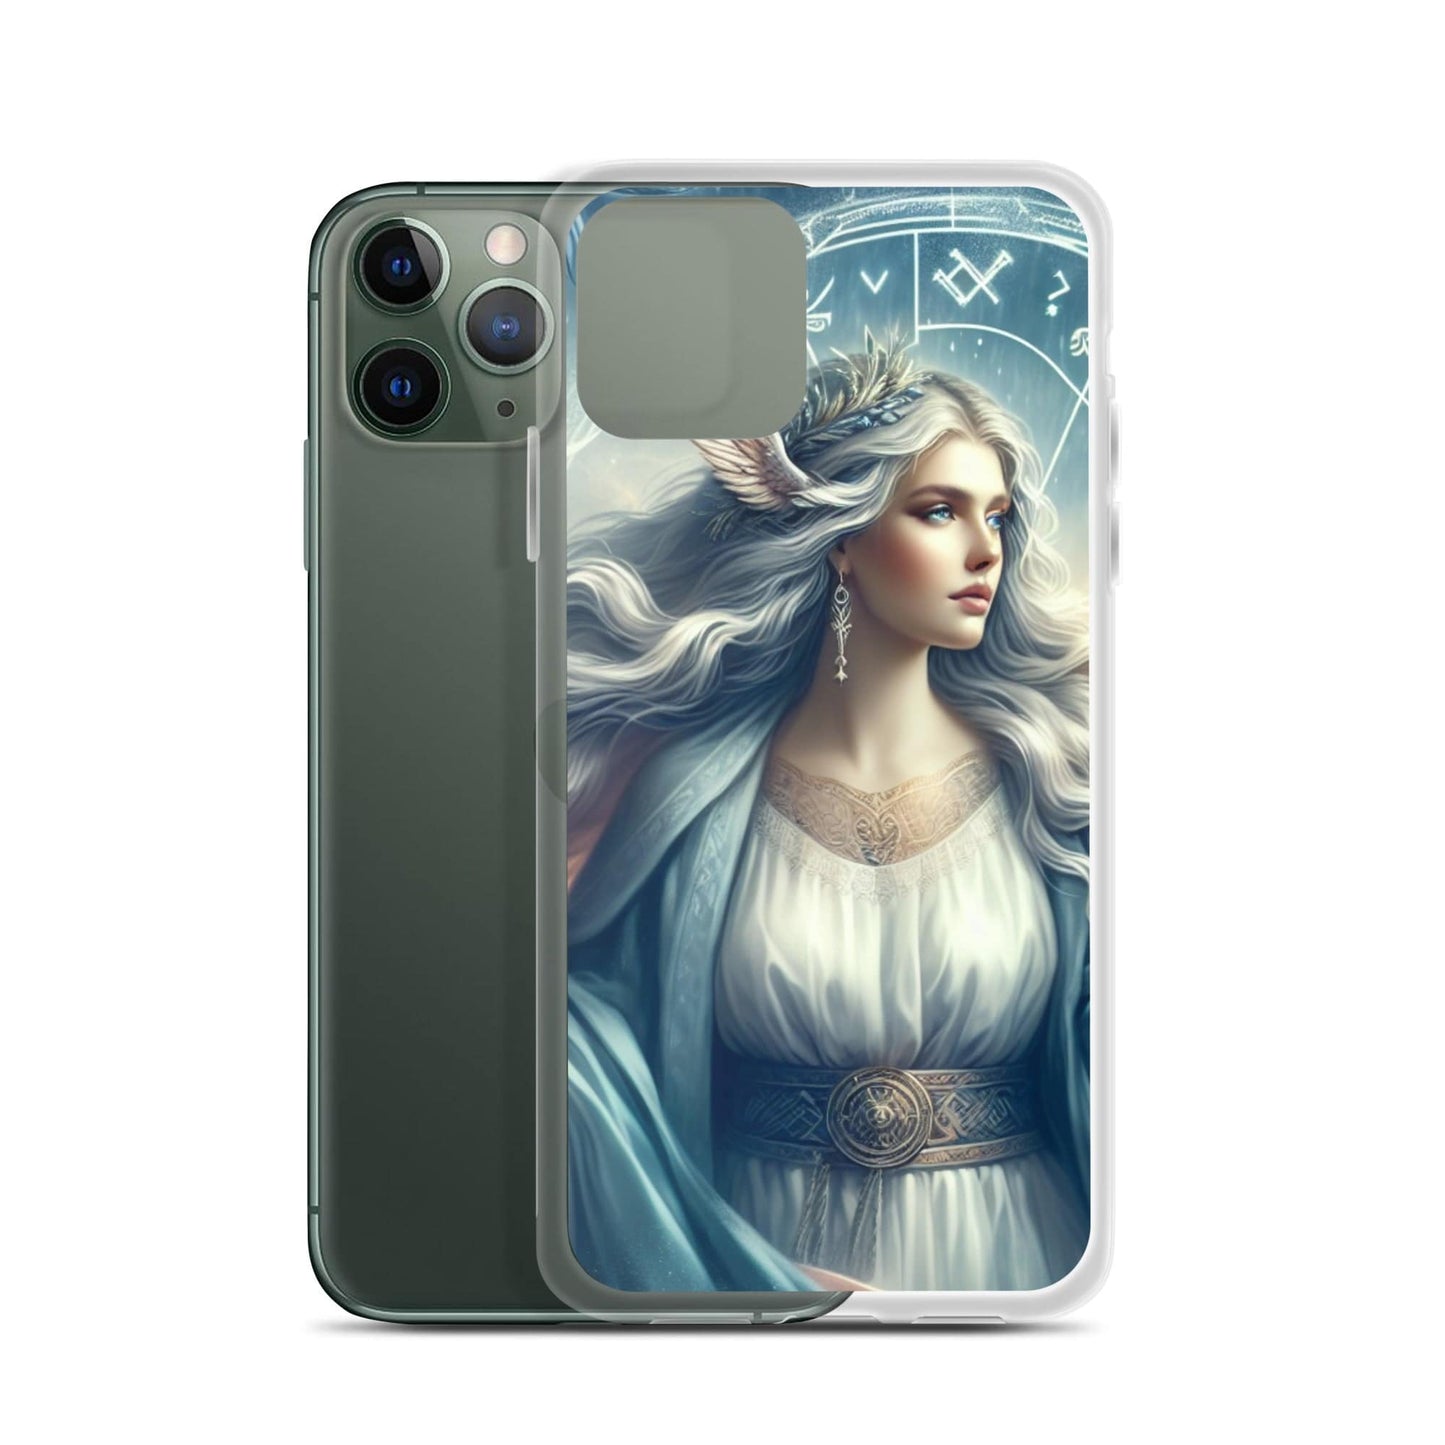 Valkyrie Norse IPhone Case